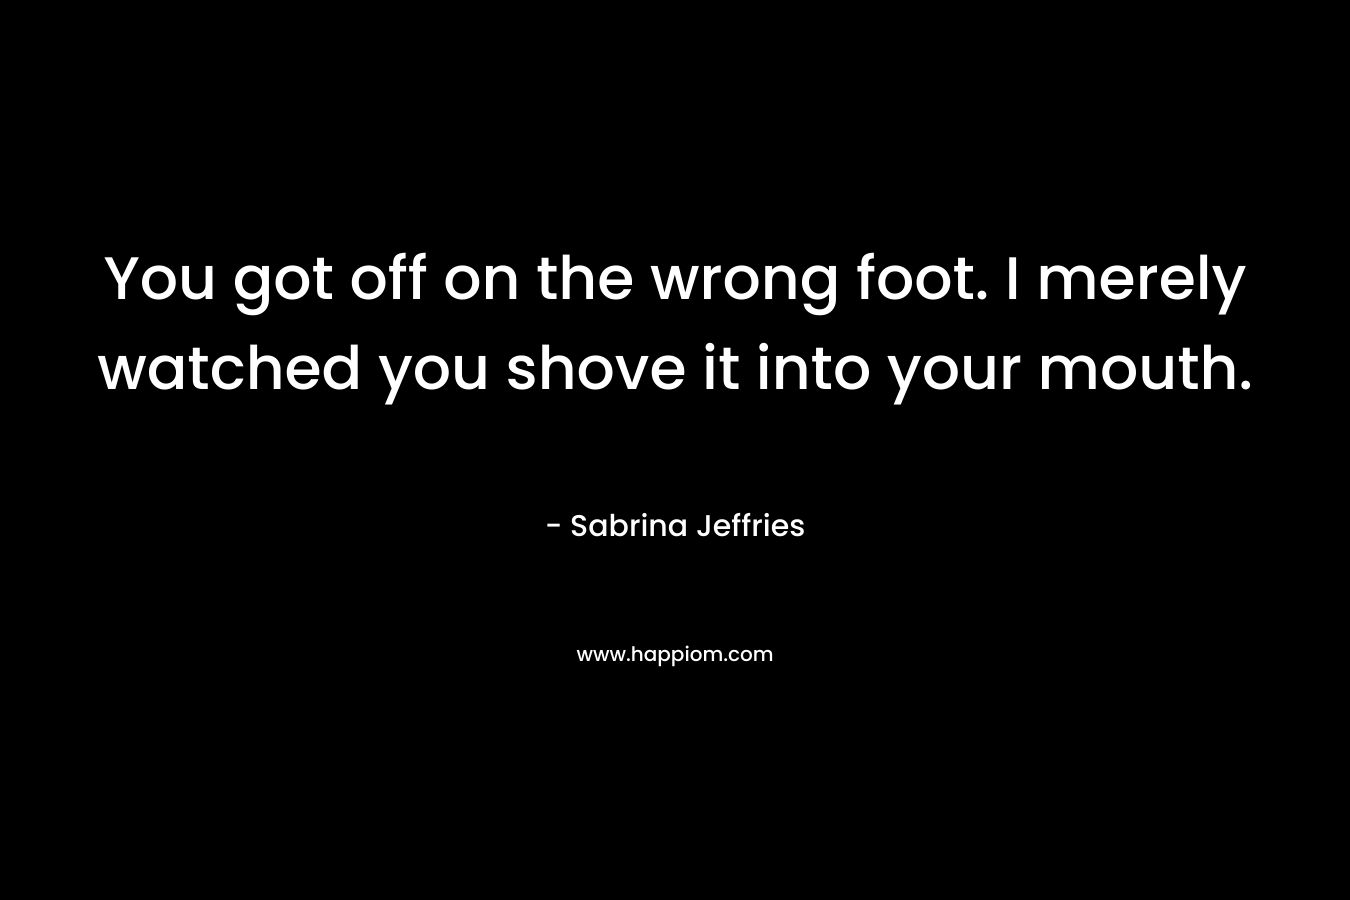 You got off on the wrong foot. I merely watched you shove it into your mouth. – Sabrina Jeffries